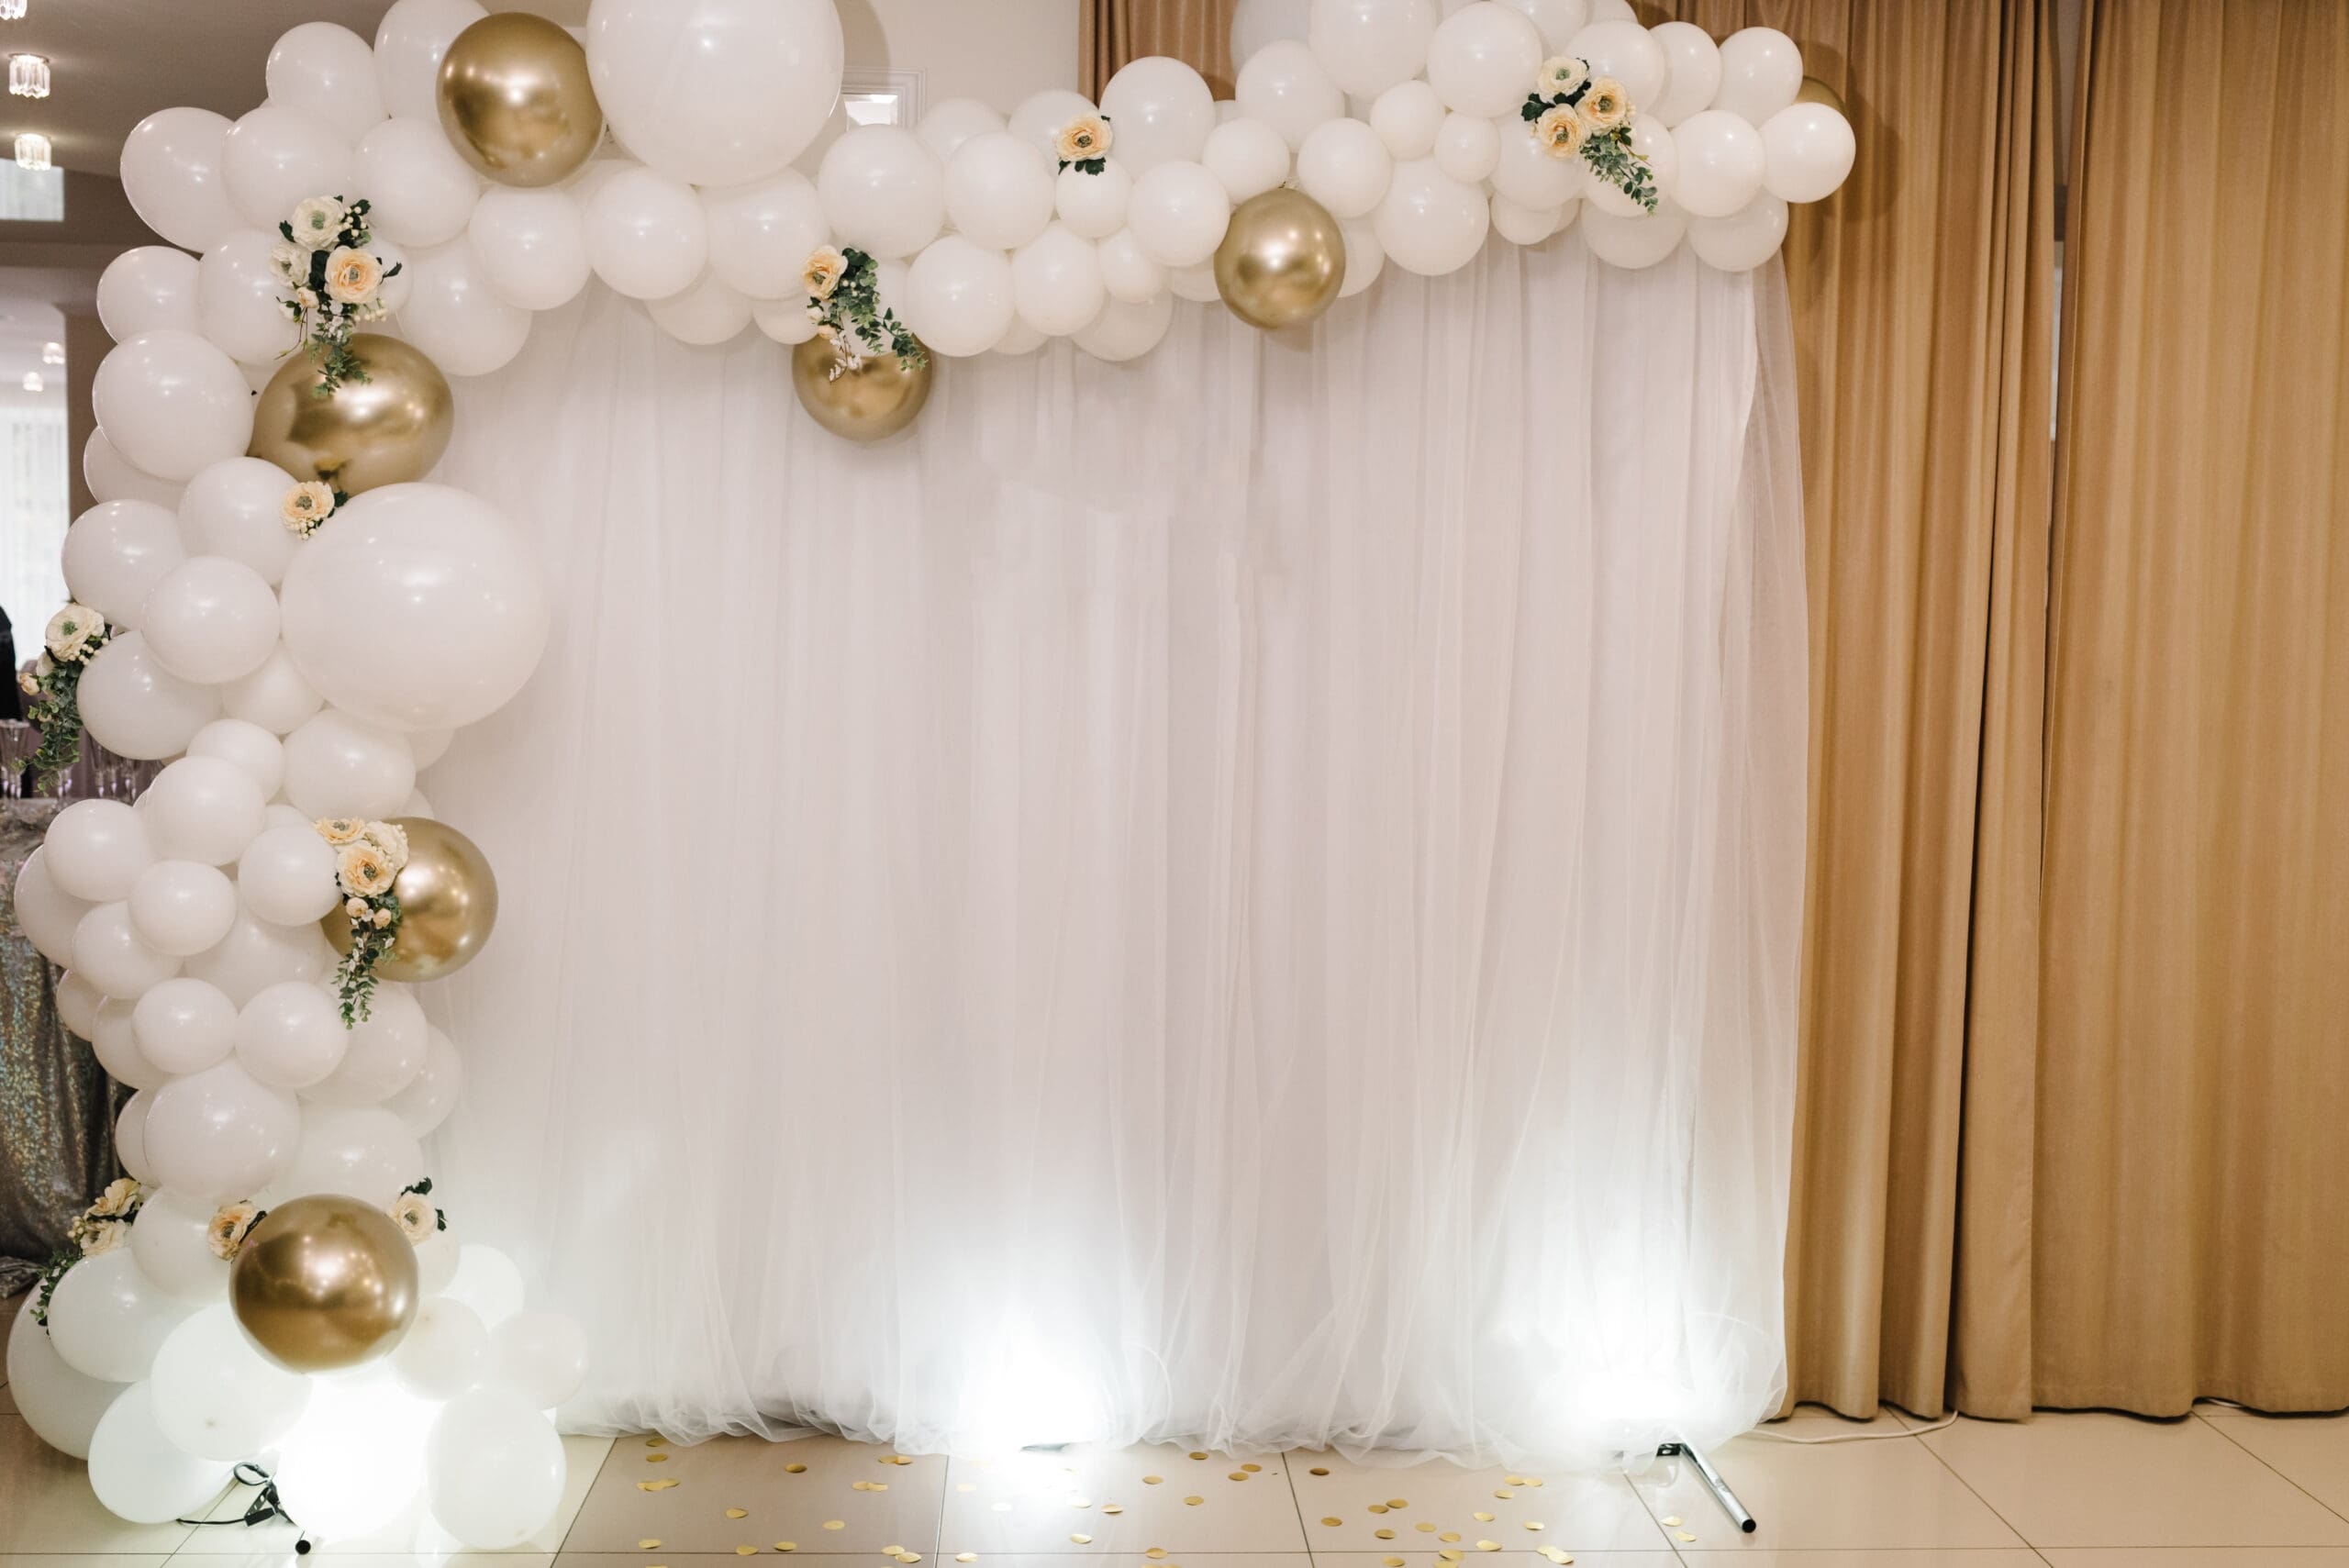 Wedding reception. Arch on a background balloons, party decor. Copy space. Celebration concept. Photo-wall, wedding decoration space or place from white and gold balloons and flowers. Autumn decor.